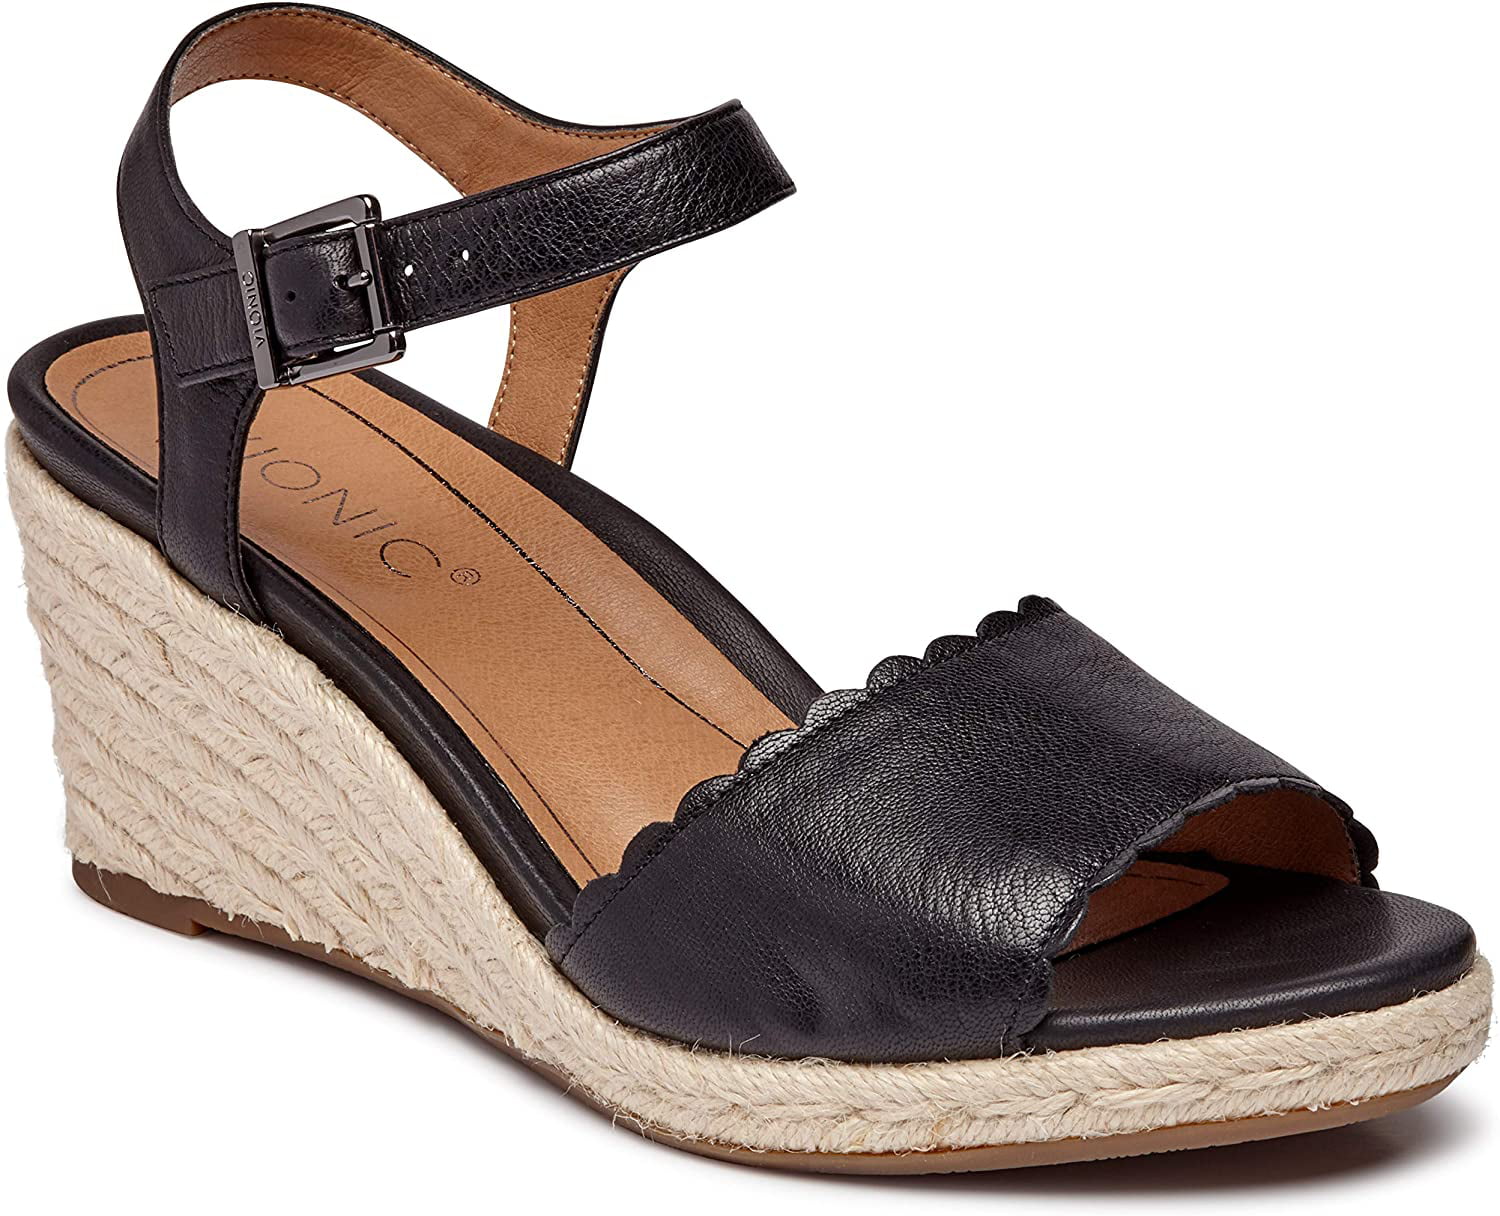 wedges with arch support